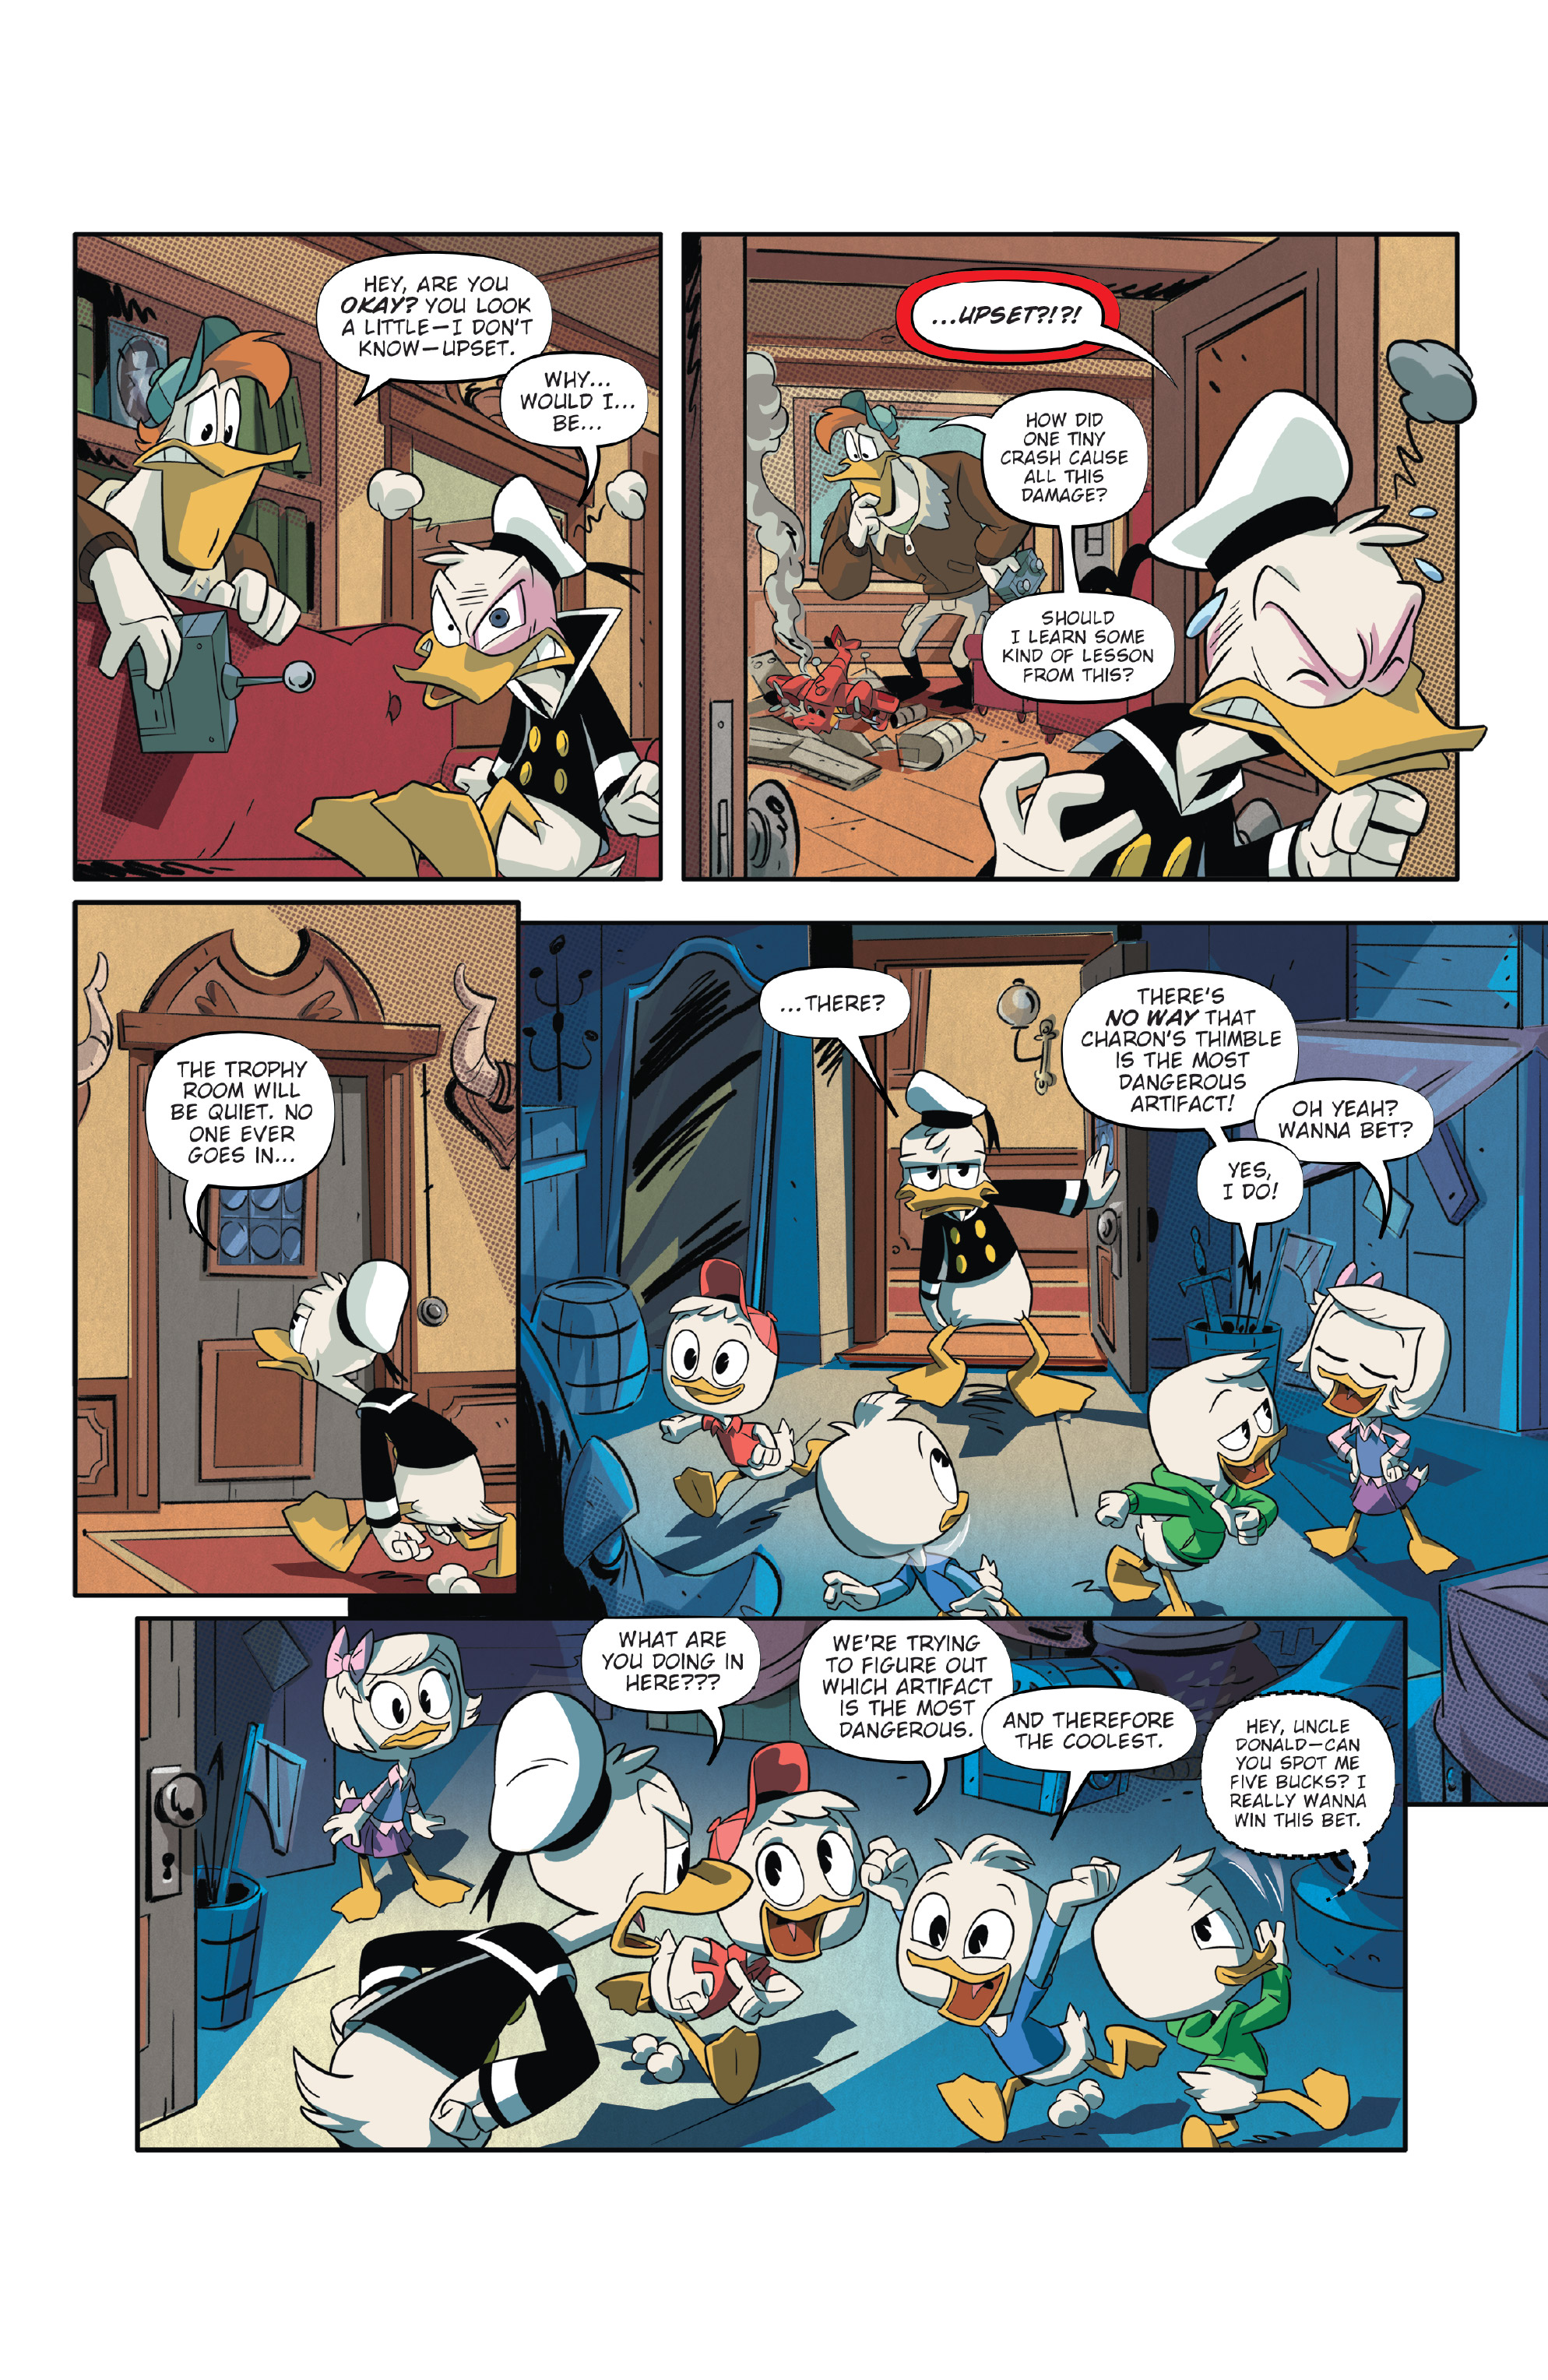 DuckTales: Silence & Science (2019-): Chapter 1 - Page 7